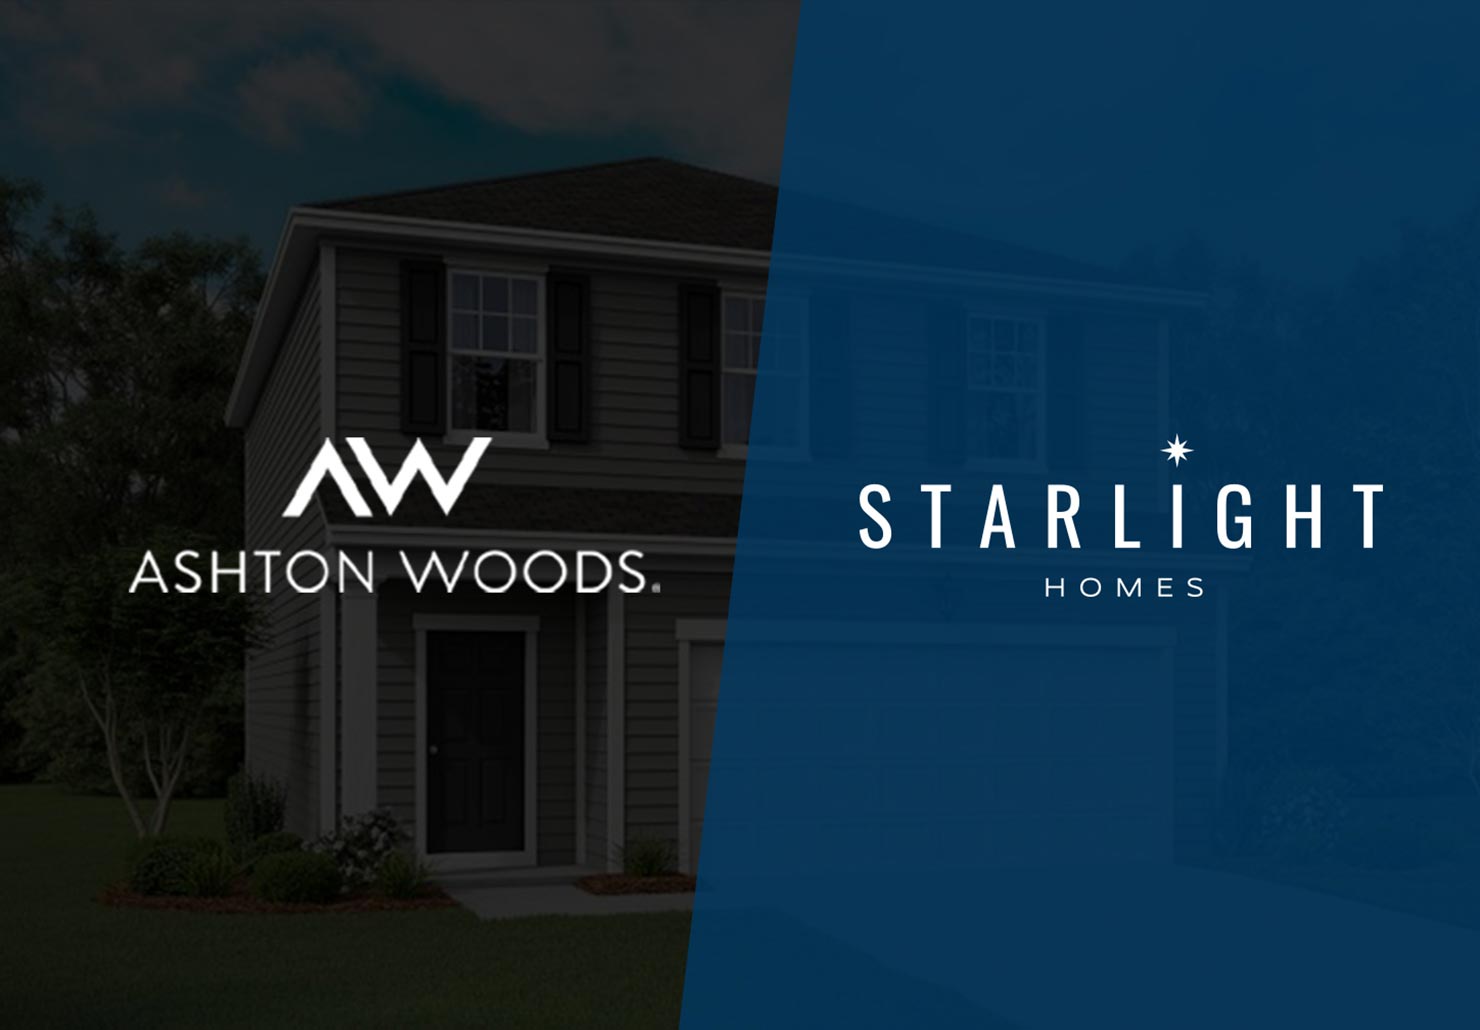 New Homes for Sale by Starlight Homes